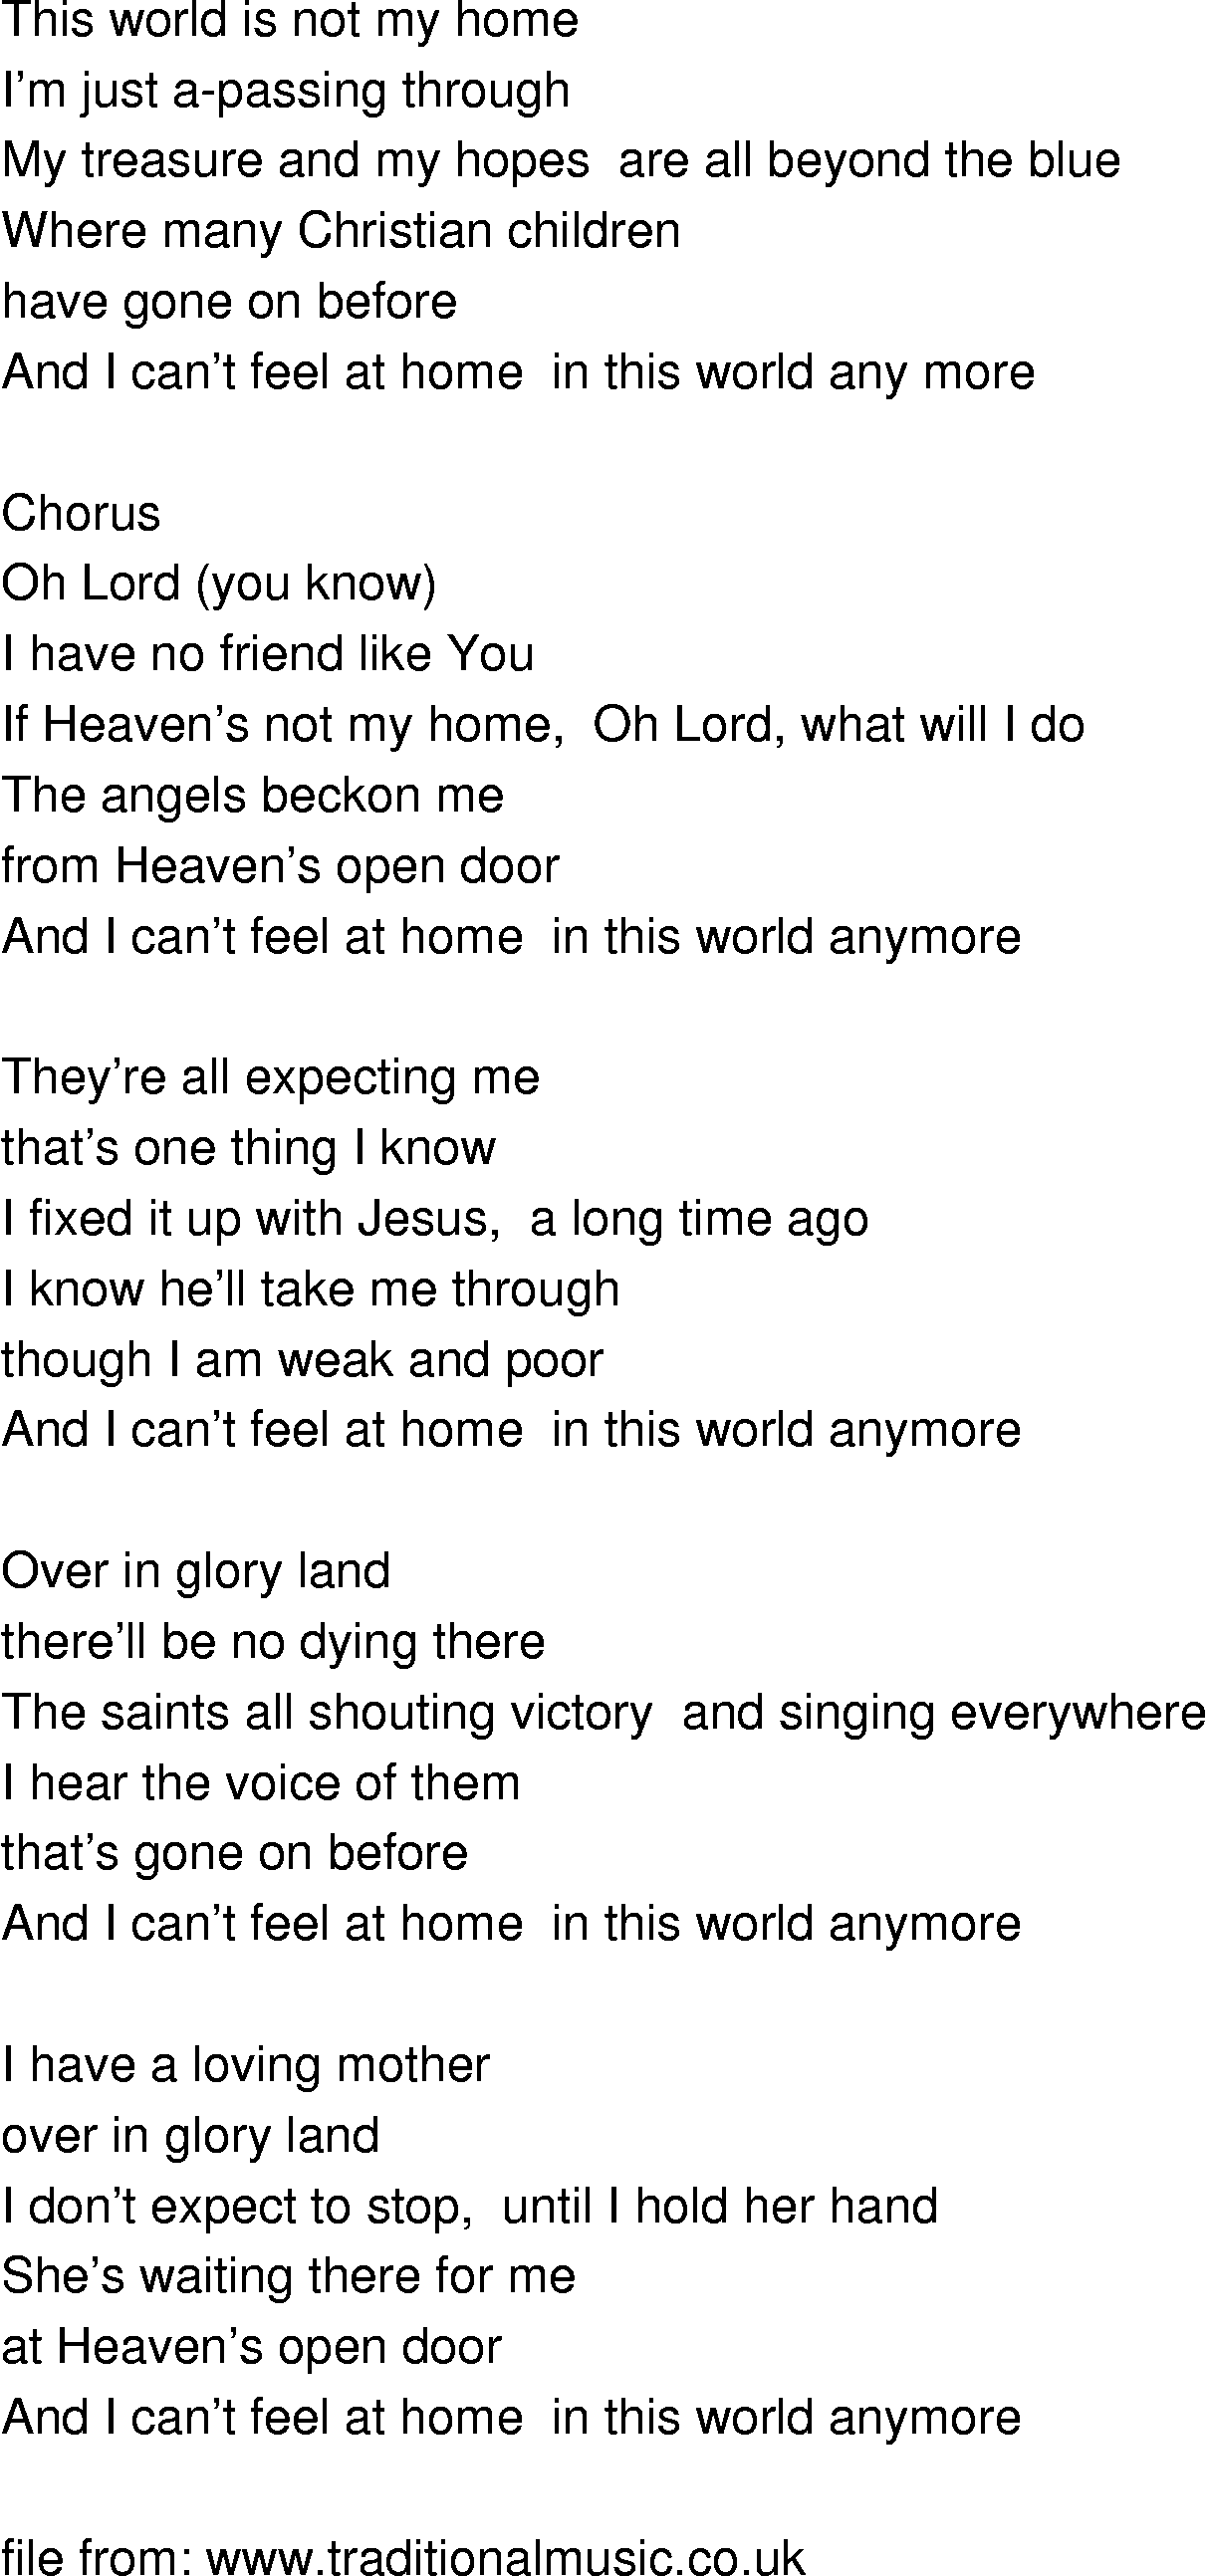 Old-Time (oldtimey) Song Lyrics - this world is not my home